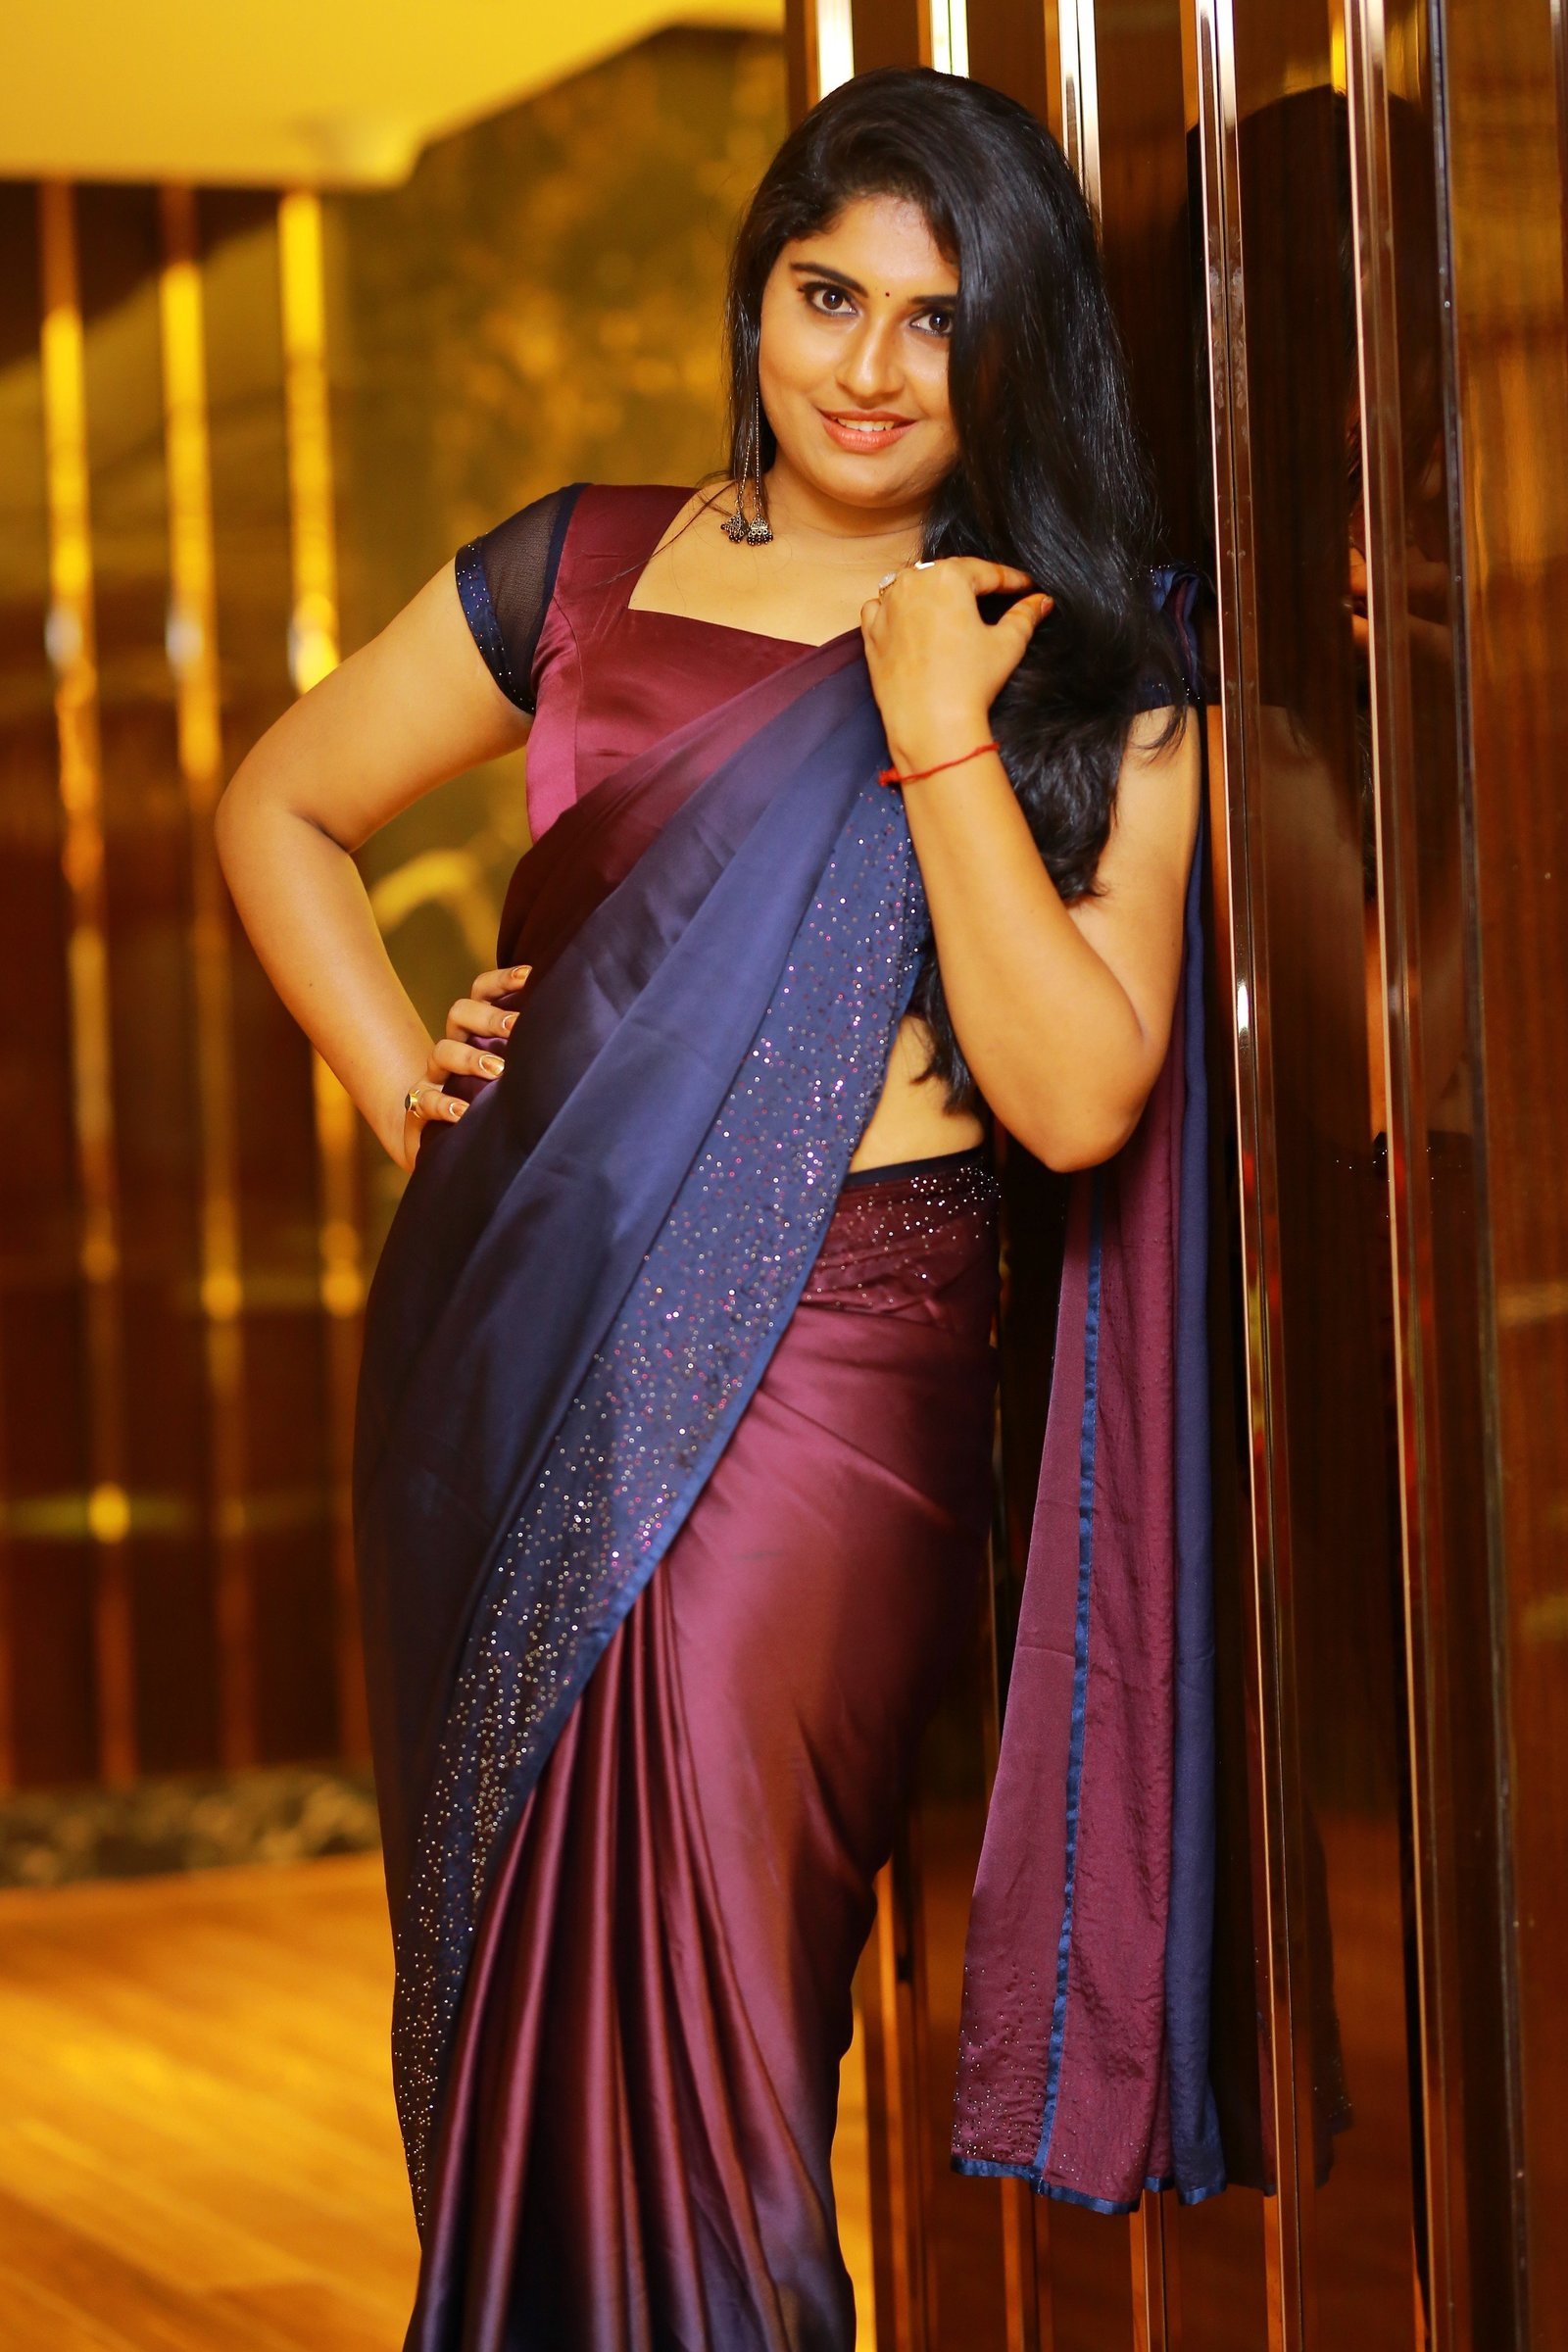 Anchor Sonia Chowdary Snapped In Saree At Hotel Daspalla Photos | Picture 1669239